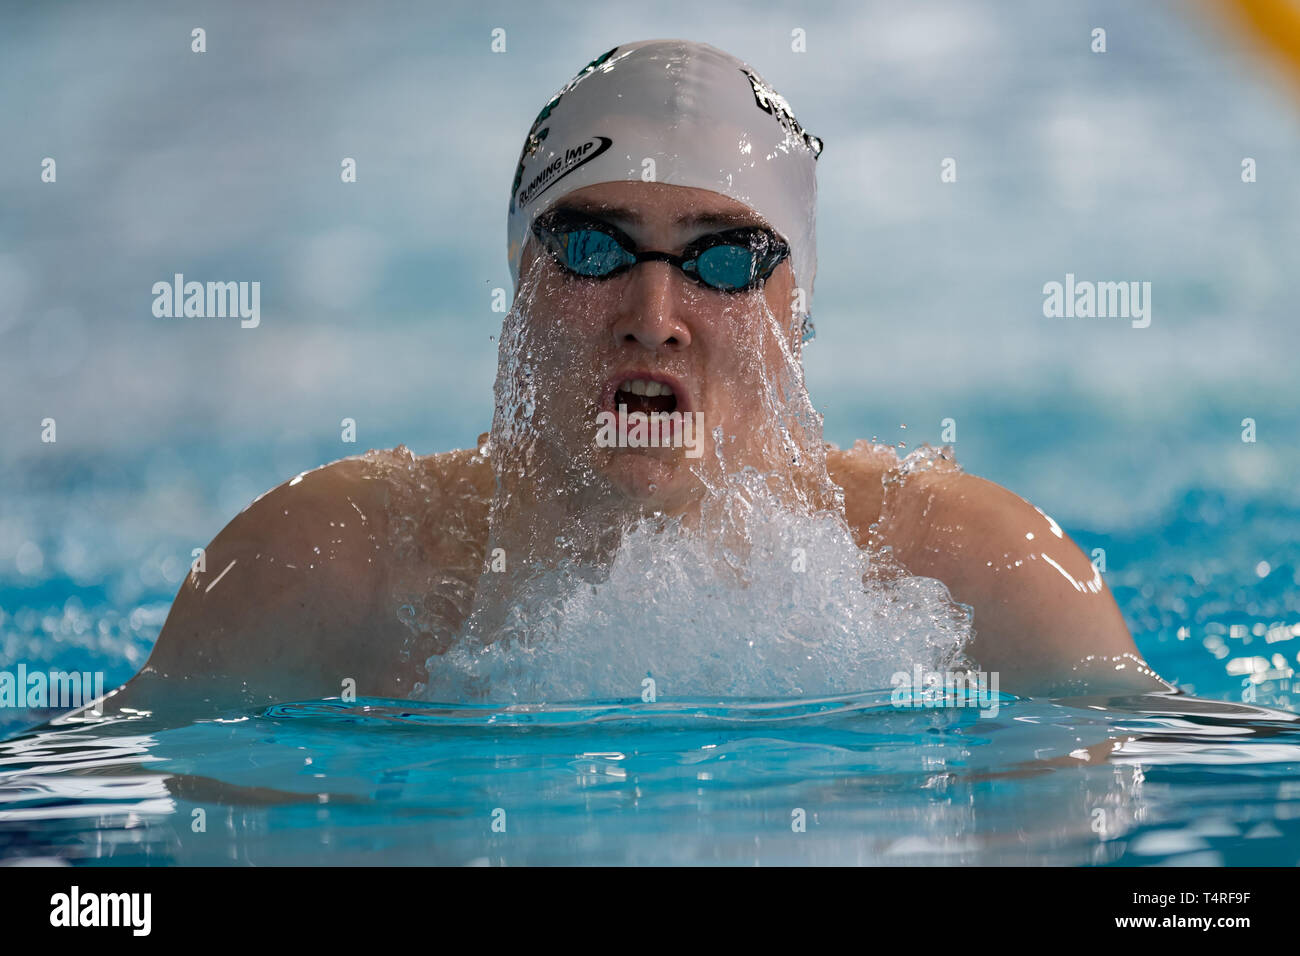 Glasgow, UK. 18th Apr, 2019. Oliver O’Halleron (Derwentside) in Mens Open 400m IM during 3rd day of British Swimming Championships 2019 at Tollcross International Swimming Centre on Thursday, April 18, 2019 in Glasgow Scotland. Credit: Taka G Wu/Alamy Live News Stock Photo